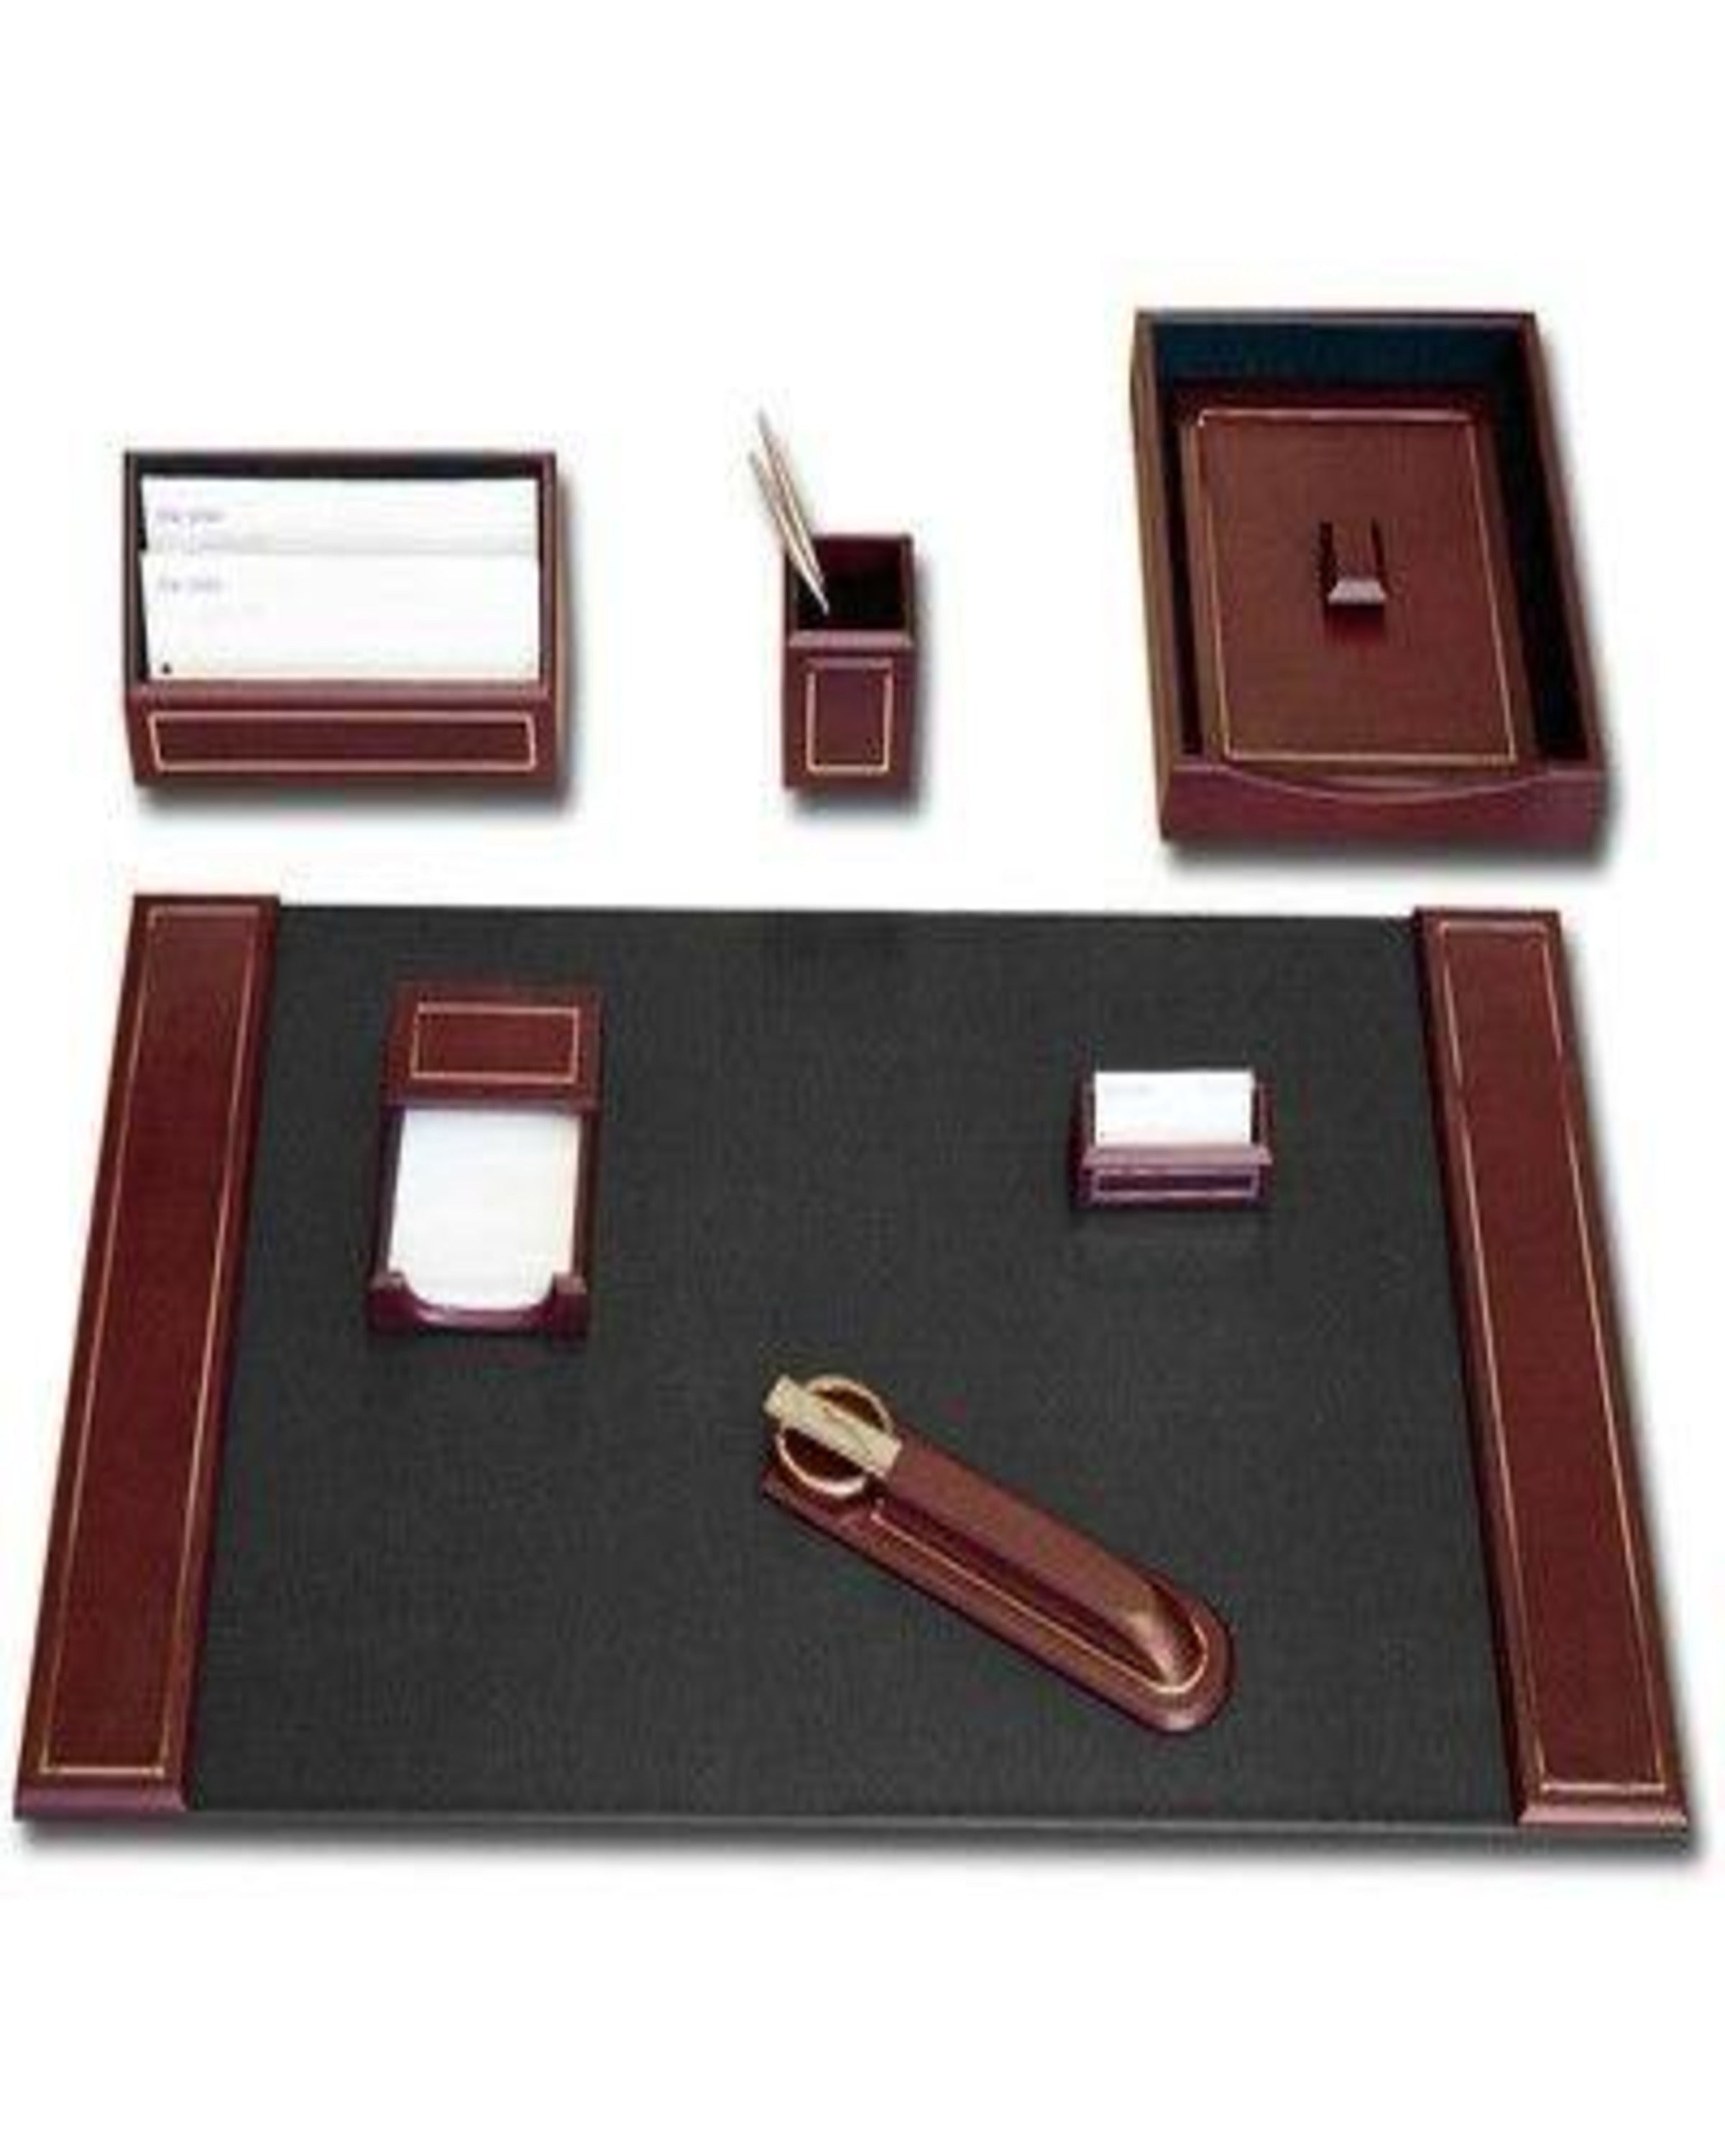 Pursuits Stylish Leather Office Desk Set ANGIE HOMES